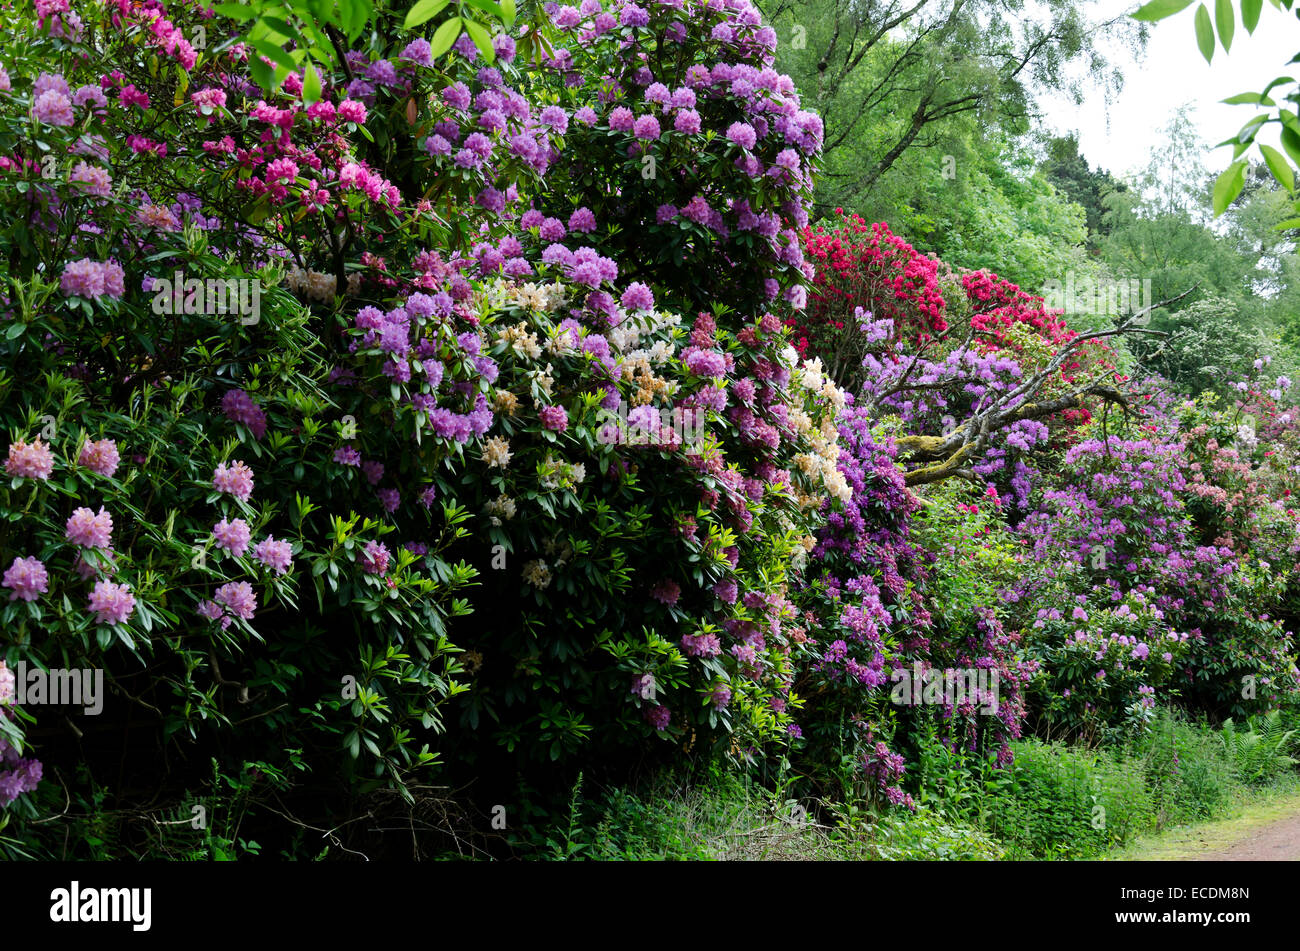 Large Rhododendron bushes in flower near South Queensferry, Central Scotland. Stock Photo